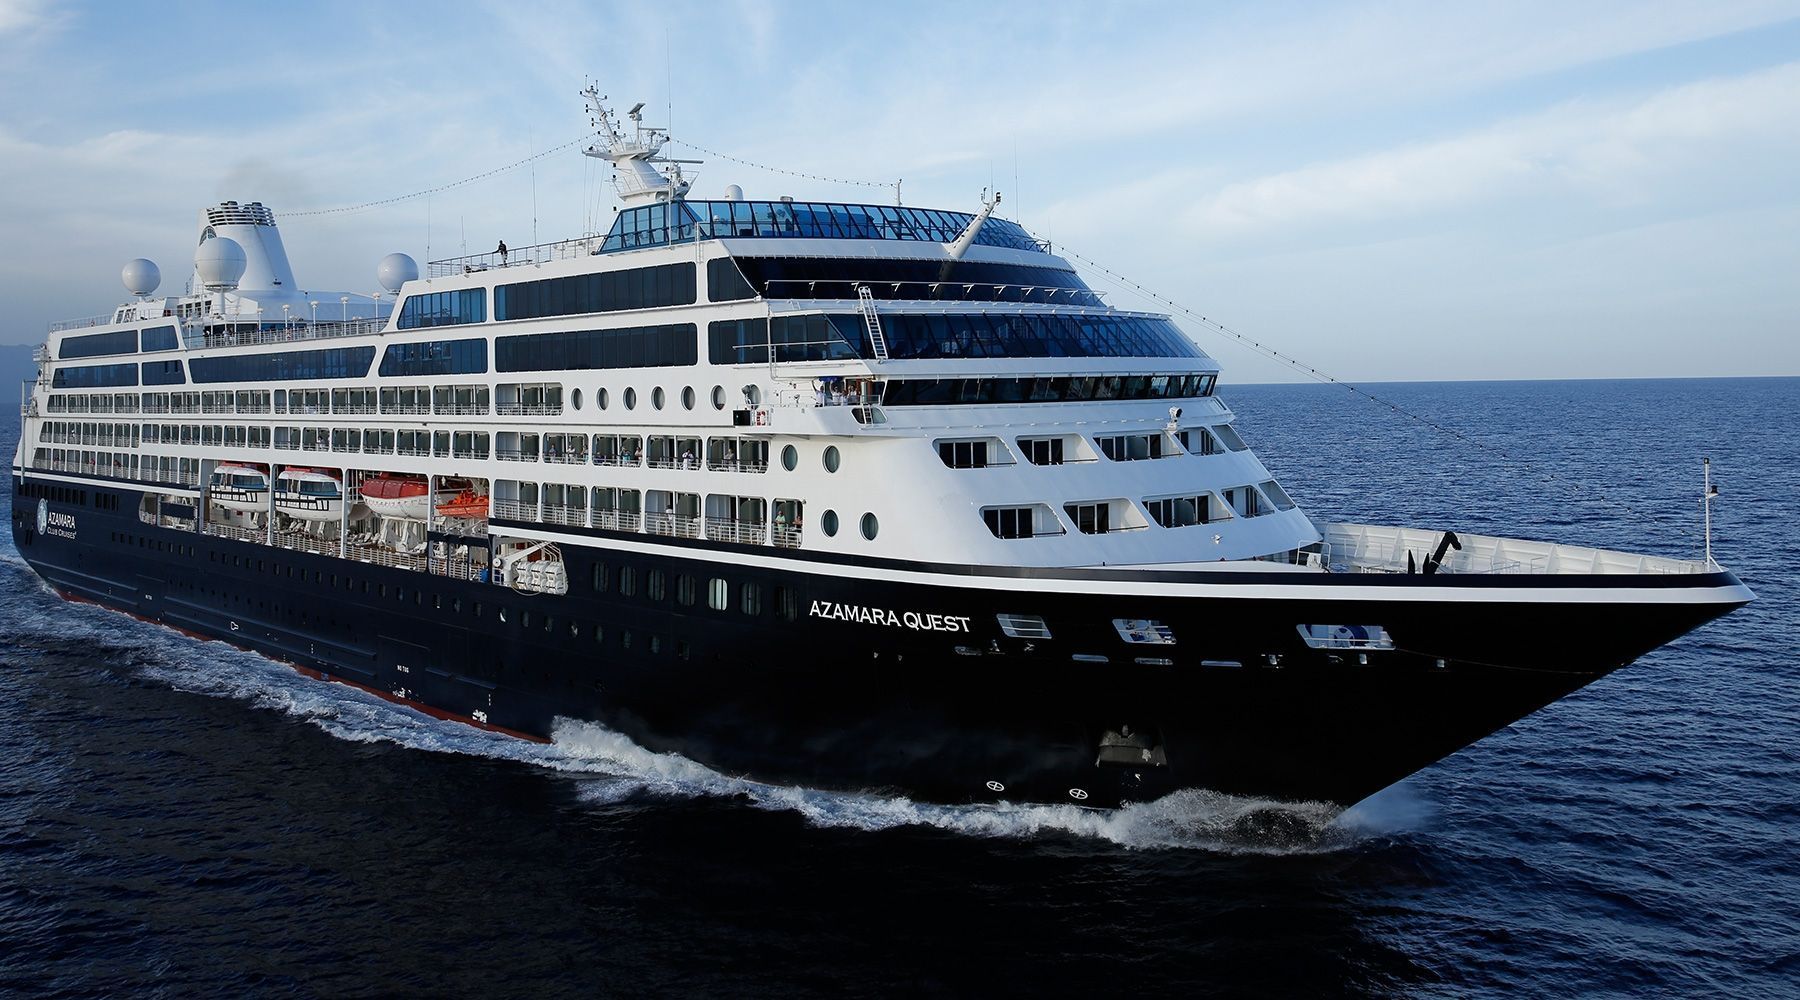 Cruise Ship Passenger Feared Dead After Falling Overboard West Of Spain's Balearic Islands